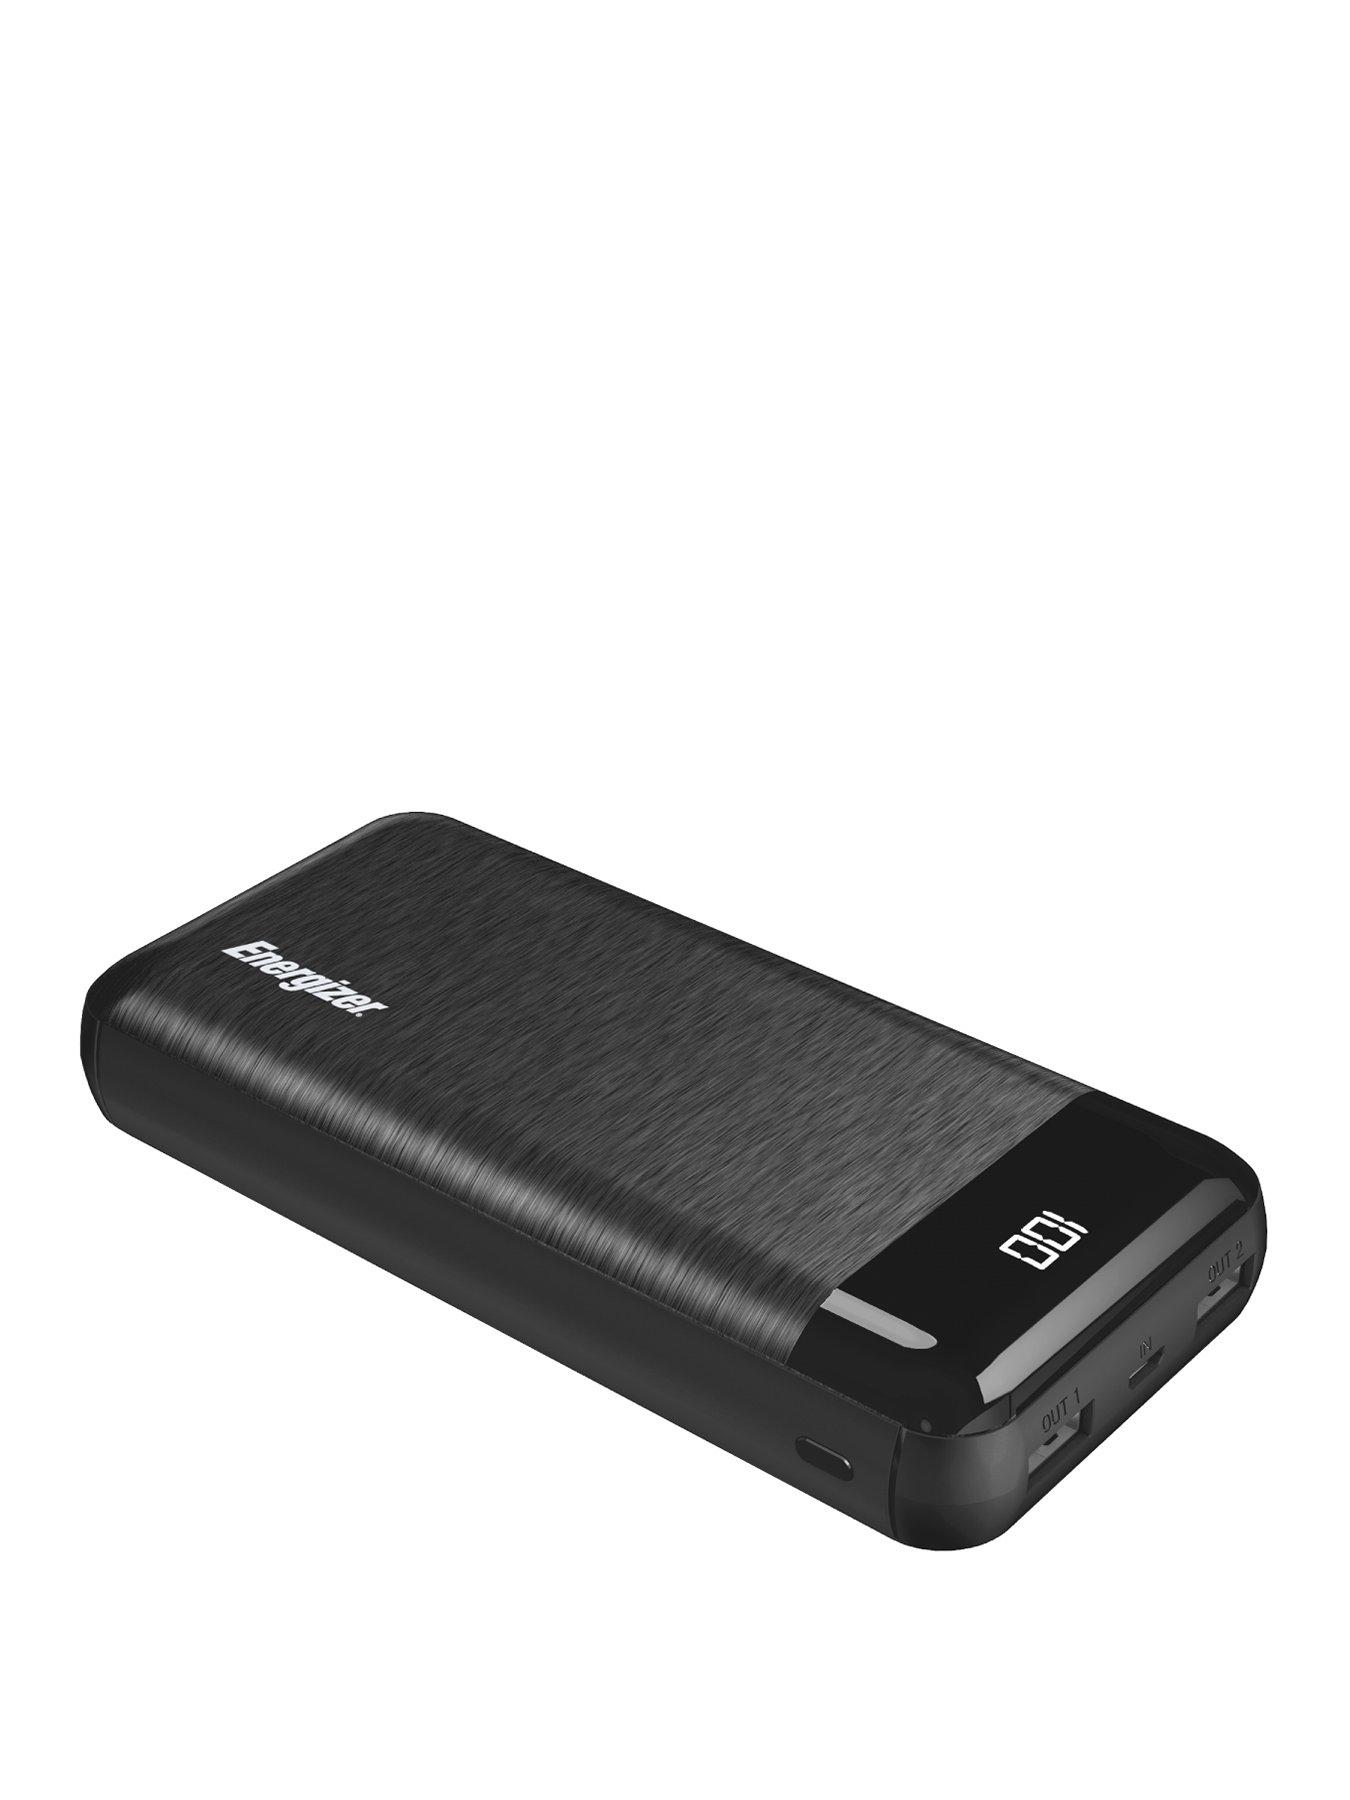 20,000mAh Power Bank with LCD display provides up to 72 hours extra on your  smartphone!!